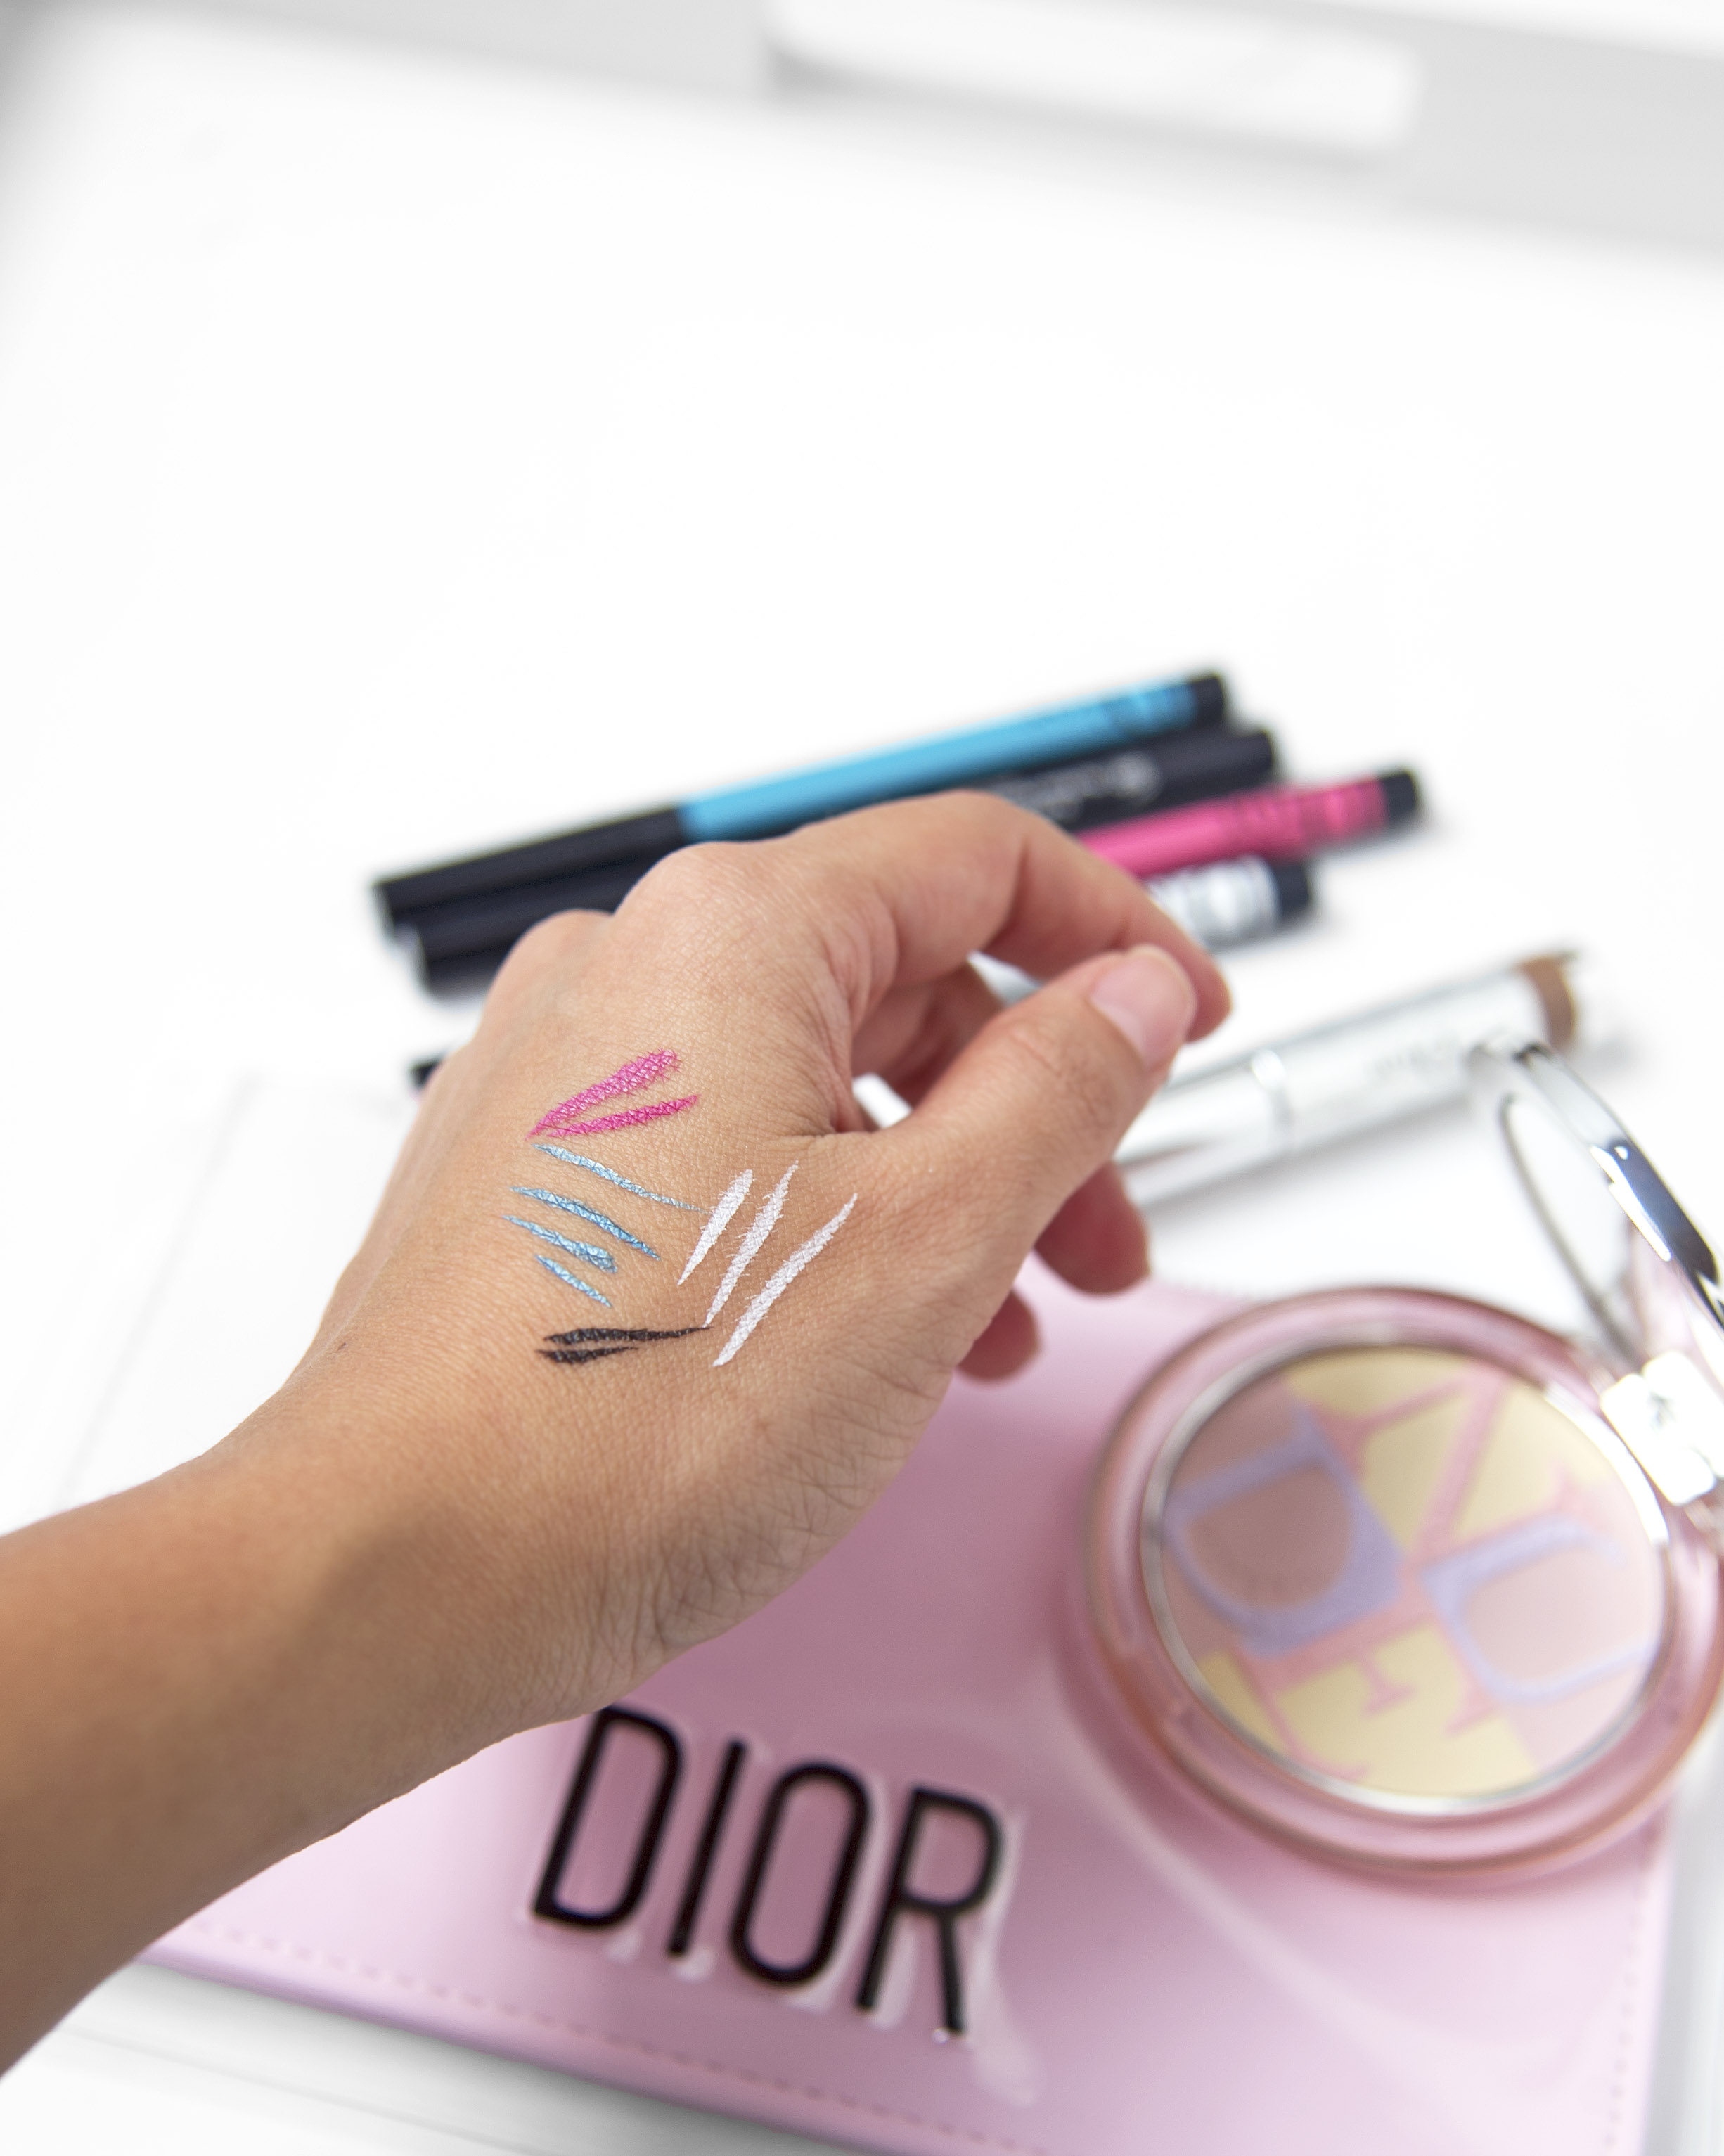 diorshow on stage liquid eyeliner review